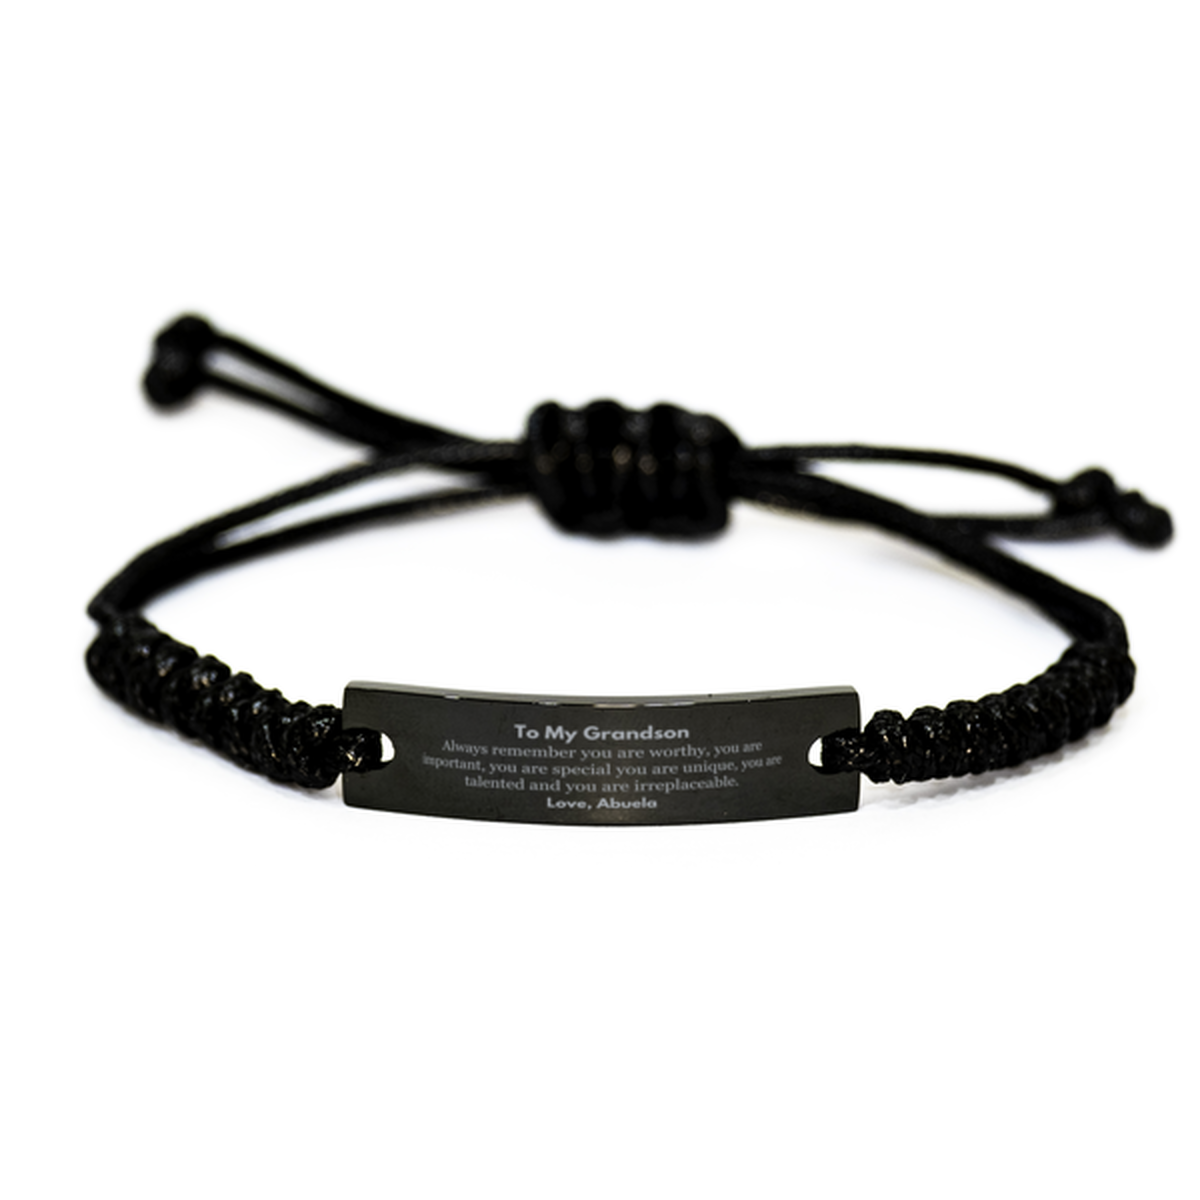 Grandson Birthday Gifts from Abuela, Inspirational Black Rope Bracelet for Grandson Christmas Graduation Gifts for Grandson Always remember you are worthy, you are important. Love, Abuela